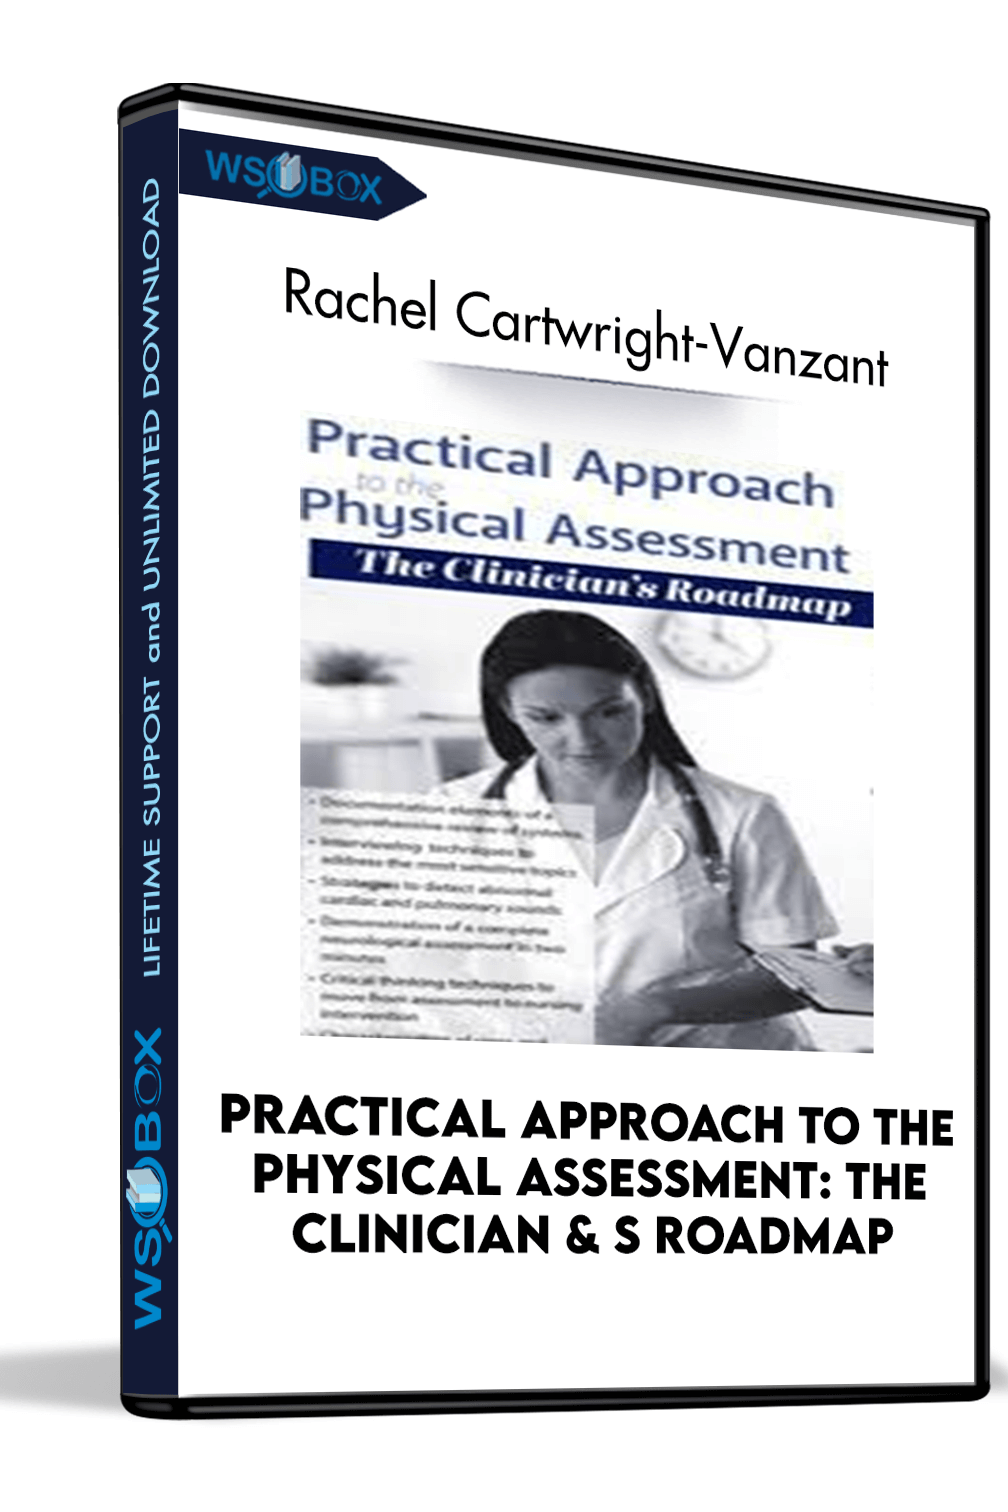 practical-approach-to-the-physical-assessment-the-clinician-s-roadmap-rachel-cartwright-vanzant